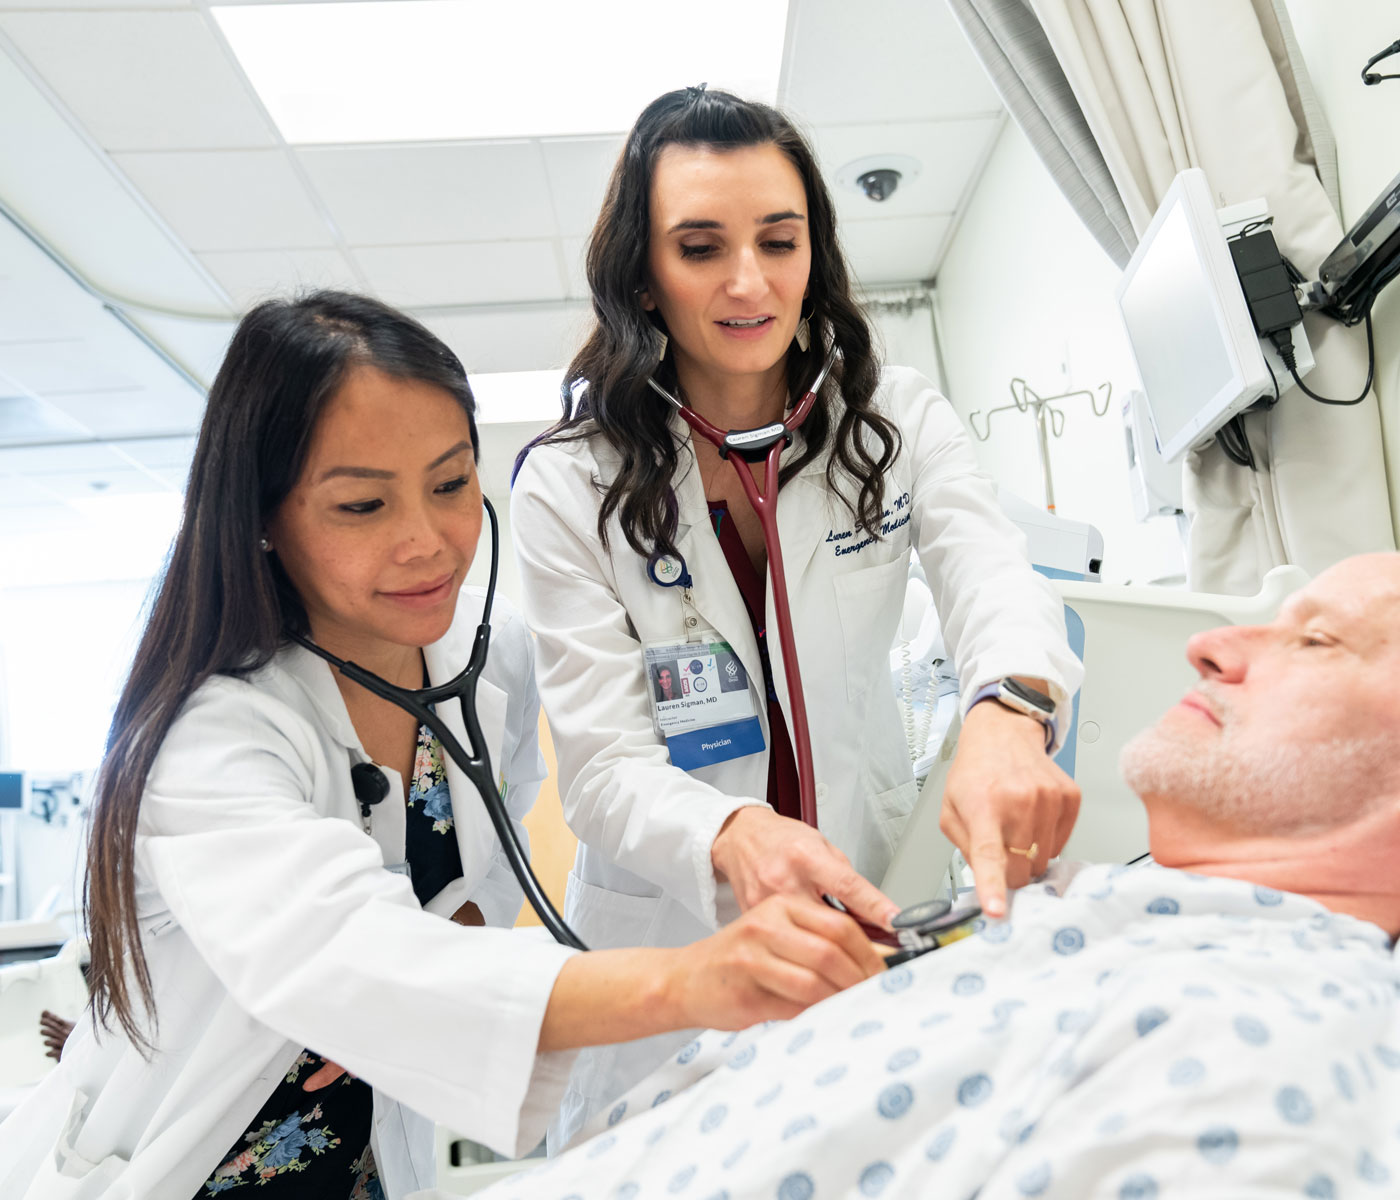 A faculty member shows a medical student how to examine a patient in a simulation lab